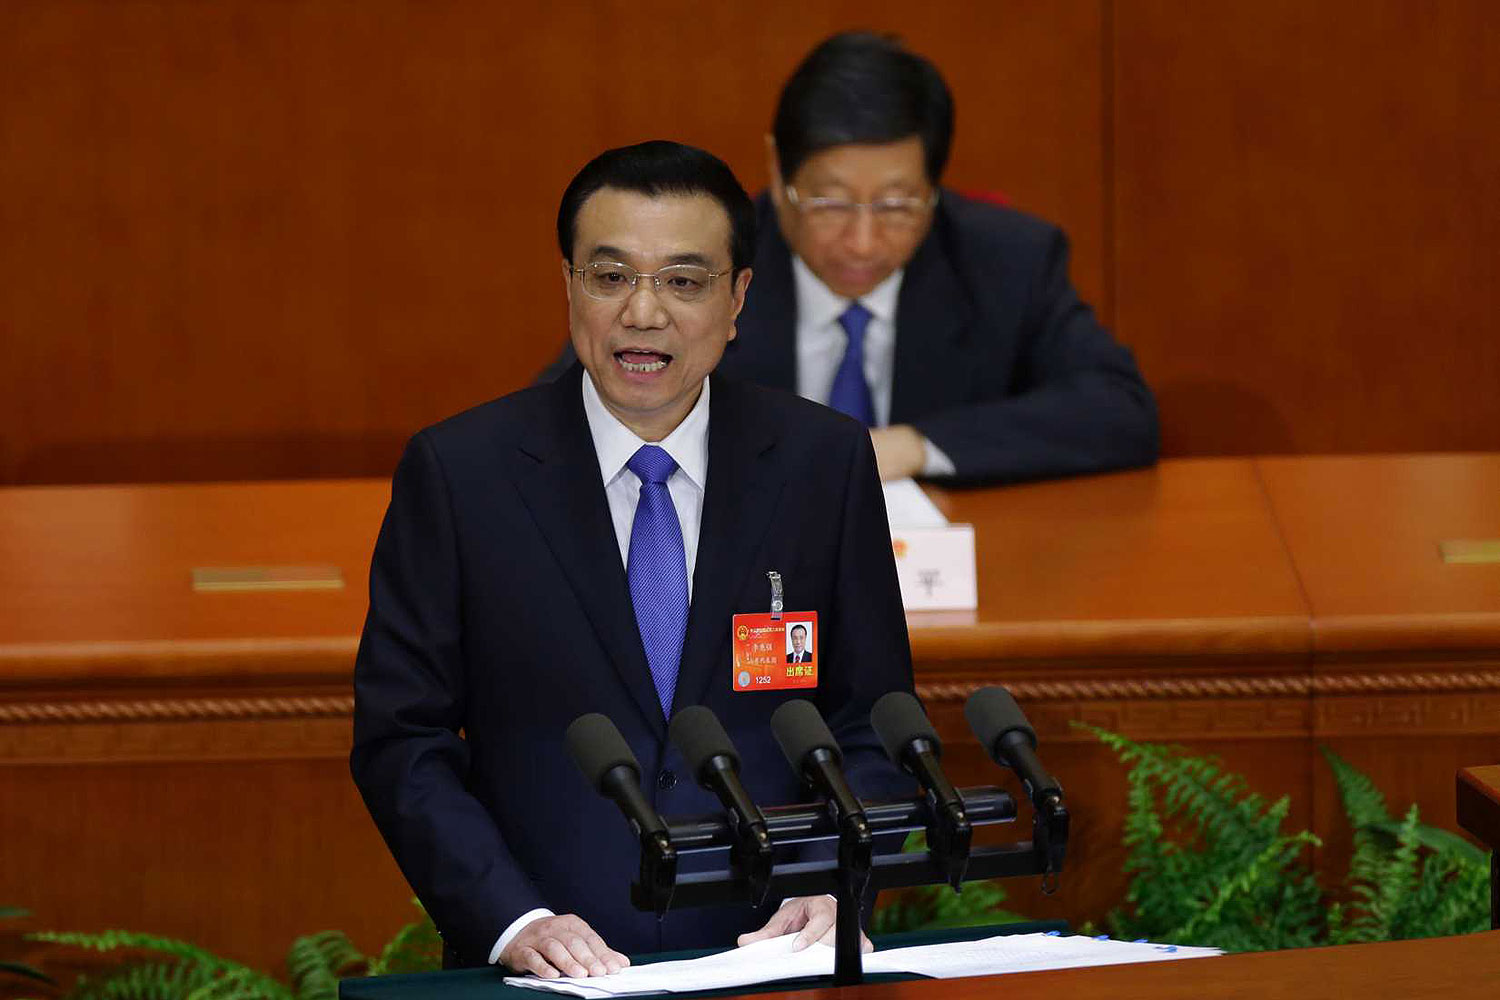 China's Premier Li Keqiang delivers the government work report during the opening ceremony of the National People's Congress (NPC) at the Great Hall of the People in Beijing Mar. 5, 2014 (Jason Lee / Reuters)